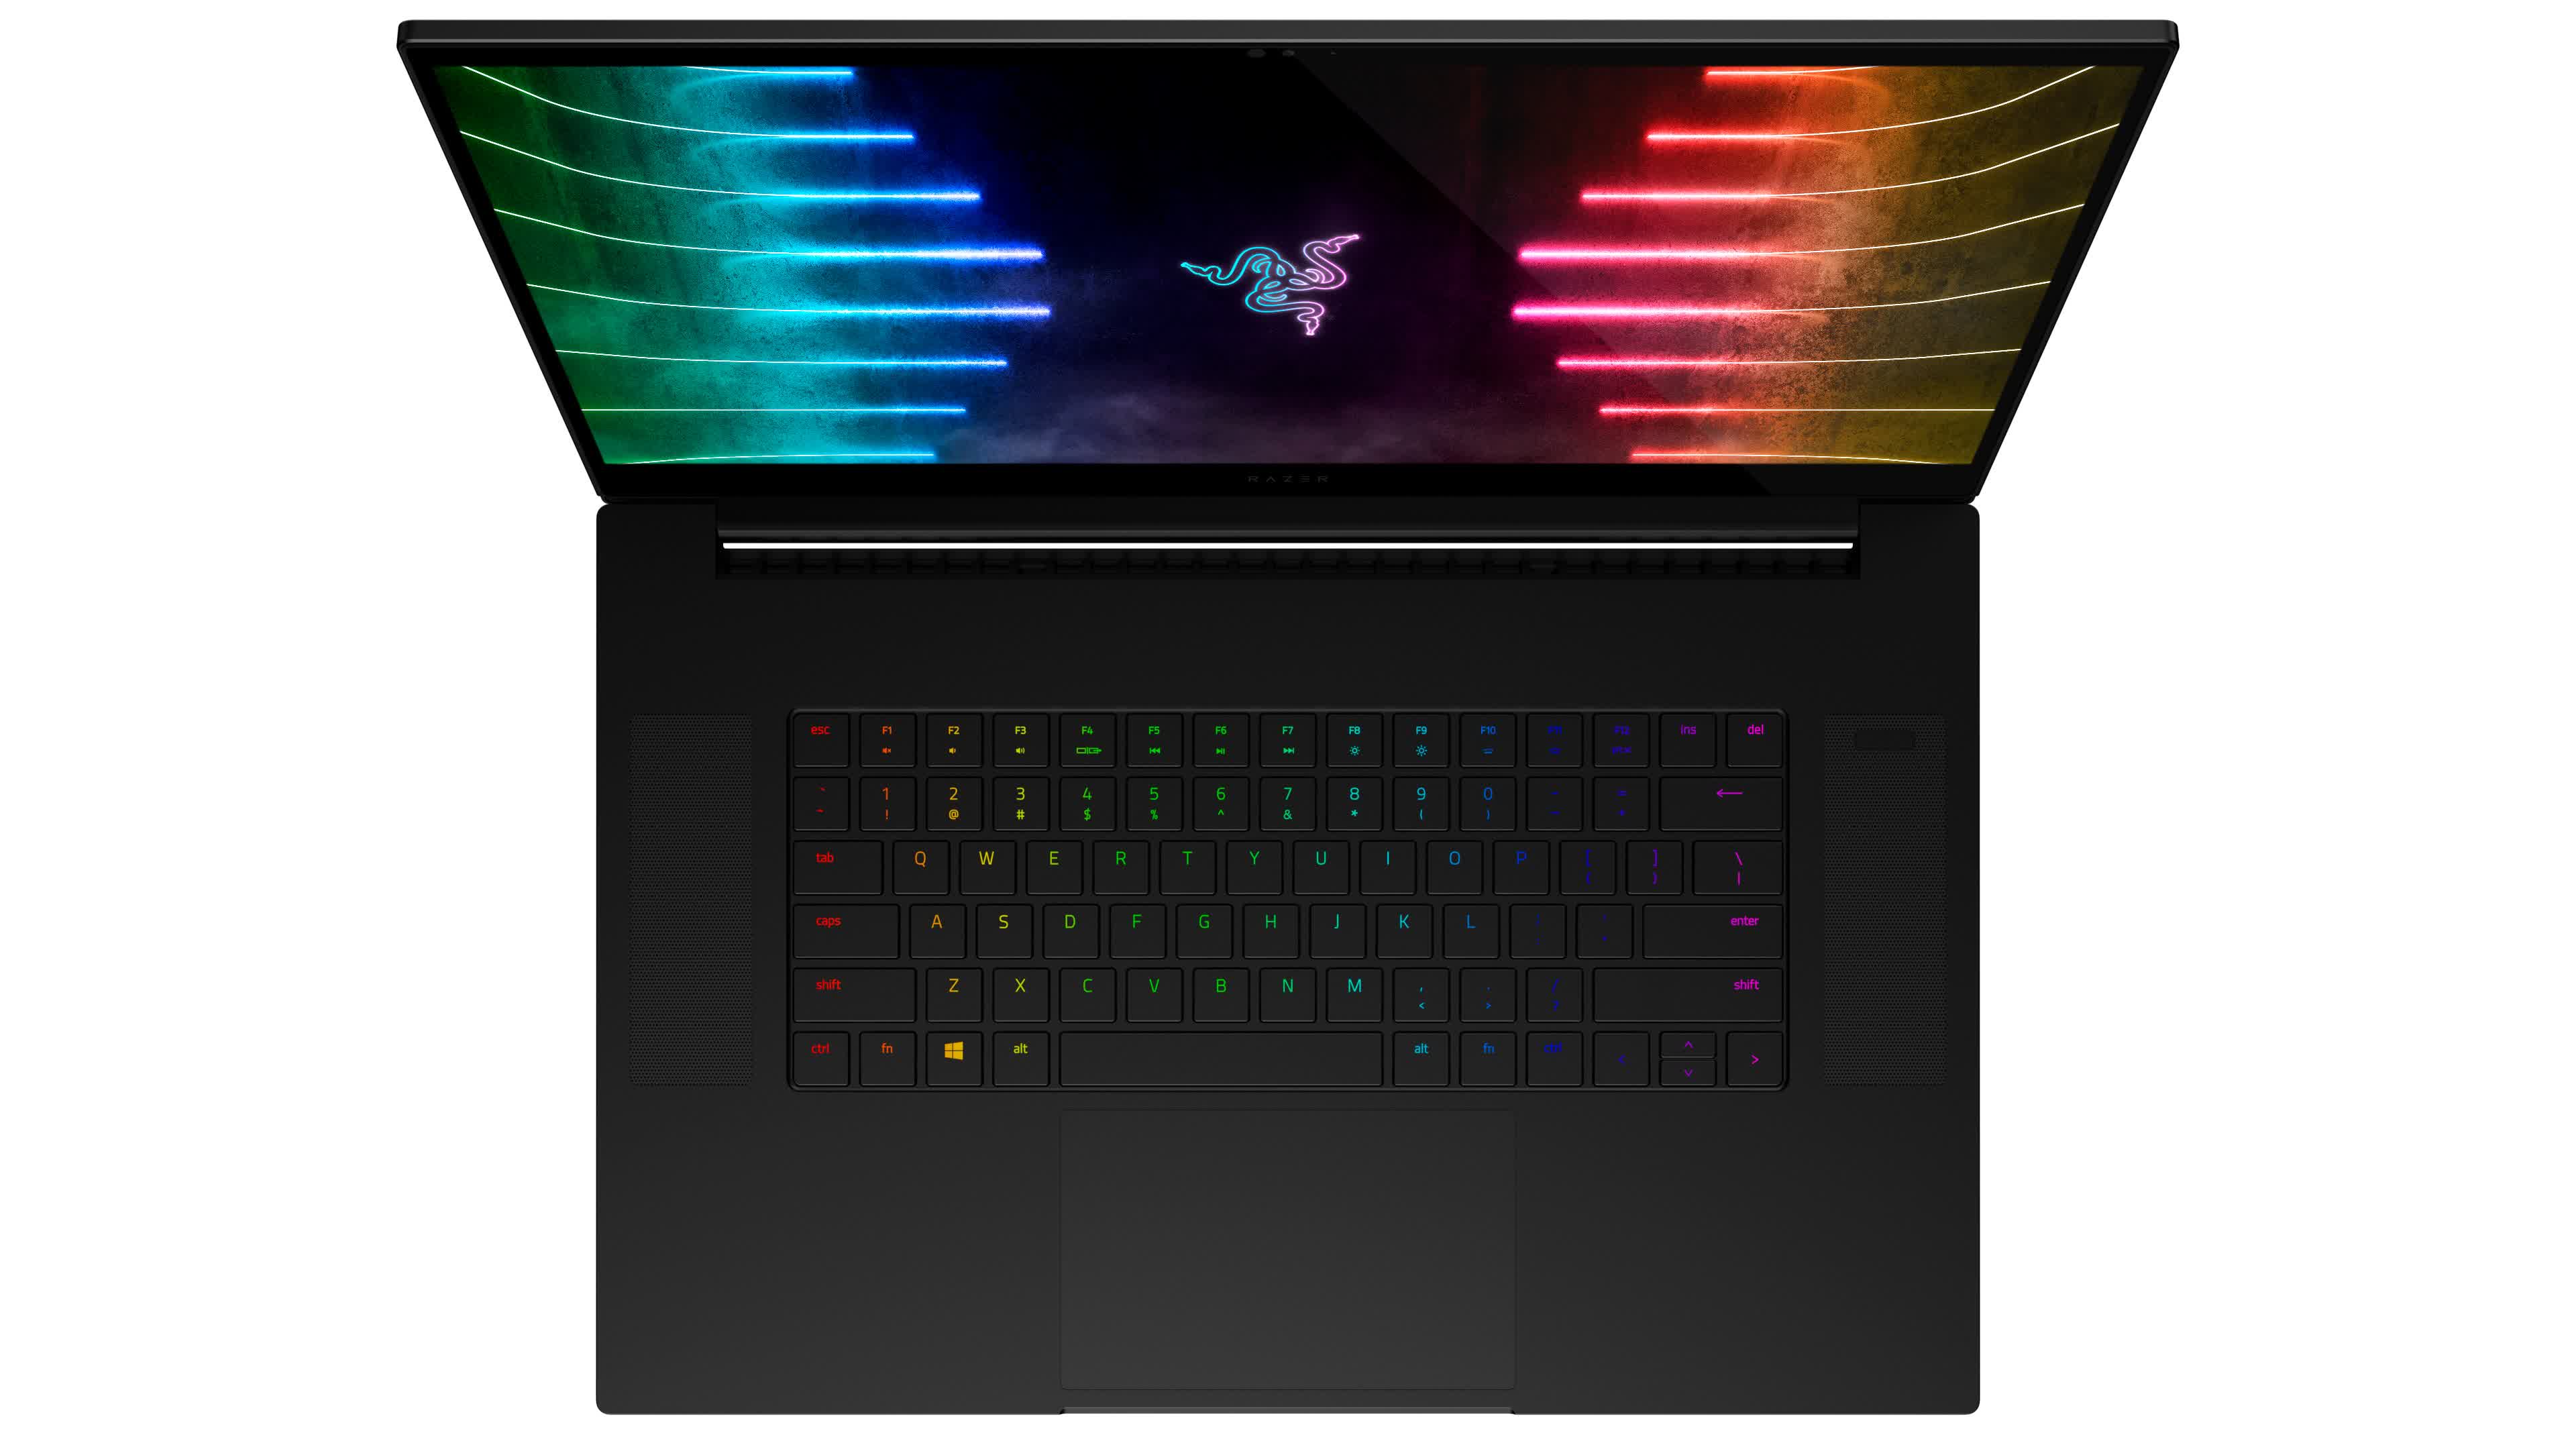 Razer refreshes Blade 17 and Blade 15 laptops with faster internals, Thunderbolt 4, and more